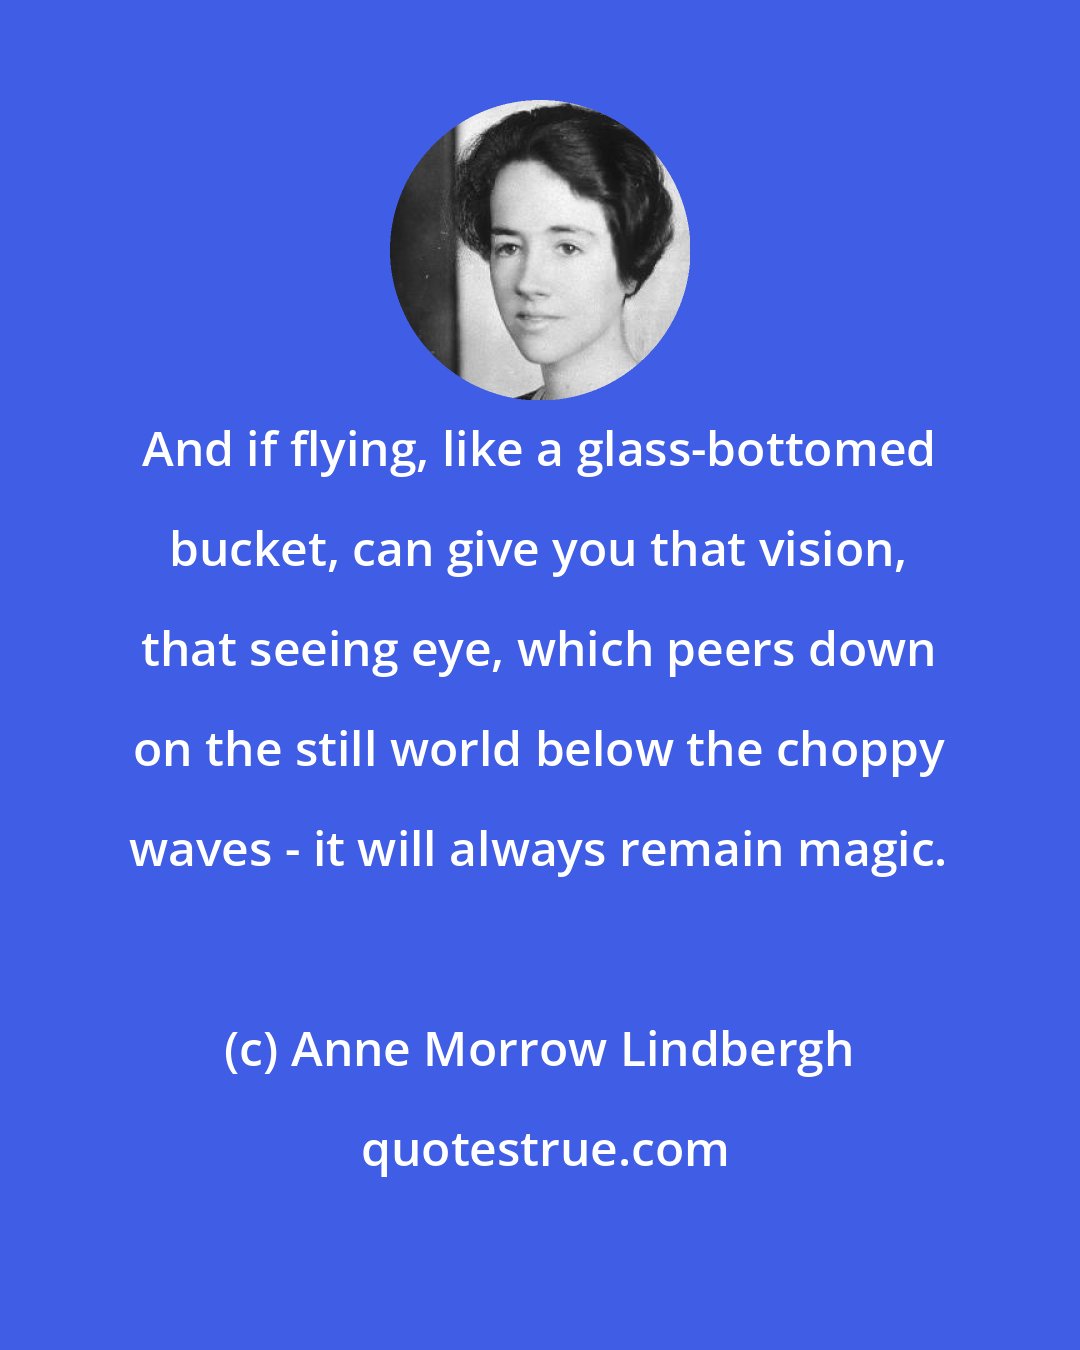 Anne Morrow Lindbergh: And if flying, like a glass-bottomed bucket, can give you that vision, that seeing eye, which peers down on the still world below the choppy waves - it will always remain magic.